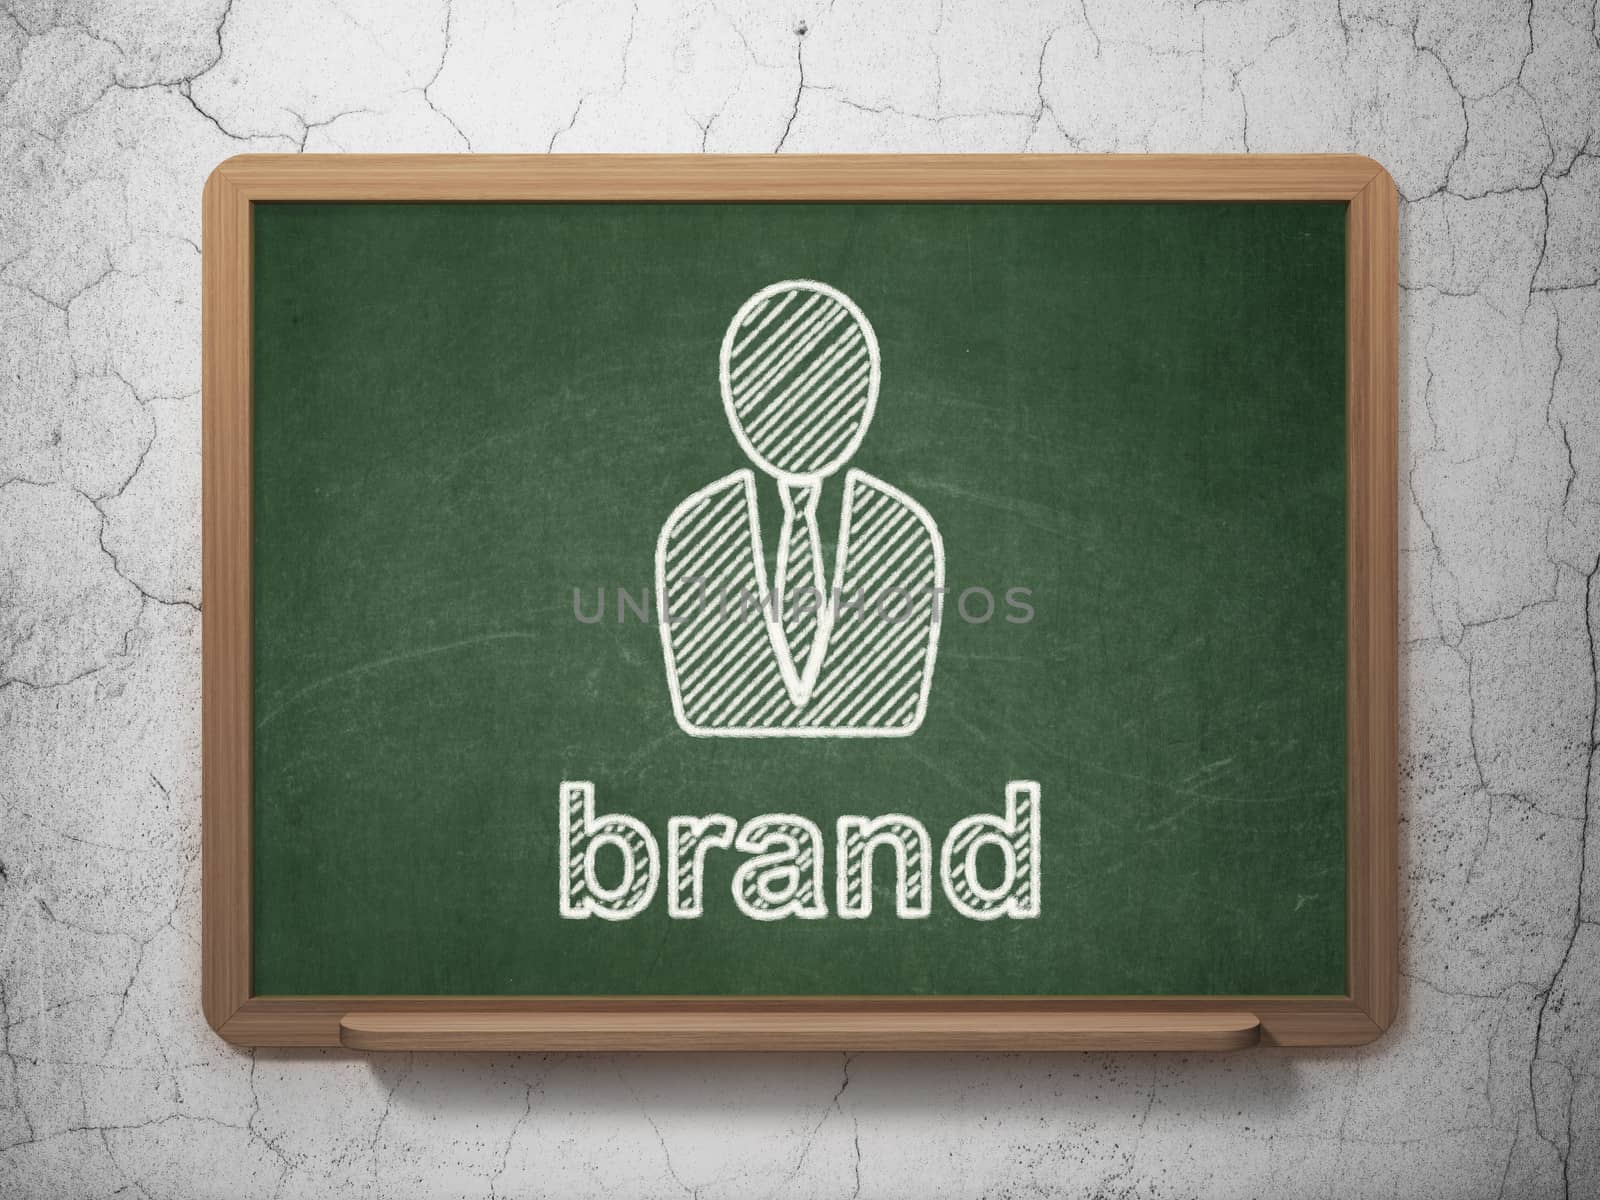 Advertising concept: Business Man icon and text Brand on Green chalkboard on grunge wall background, 3d render